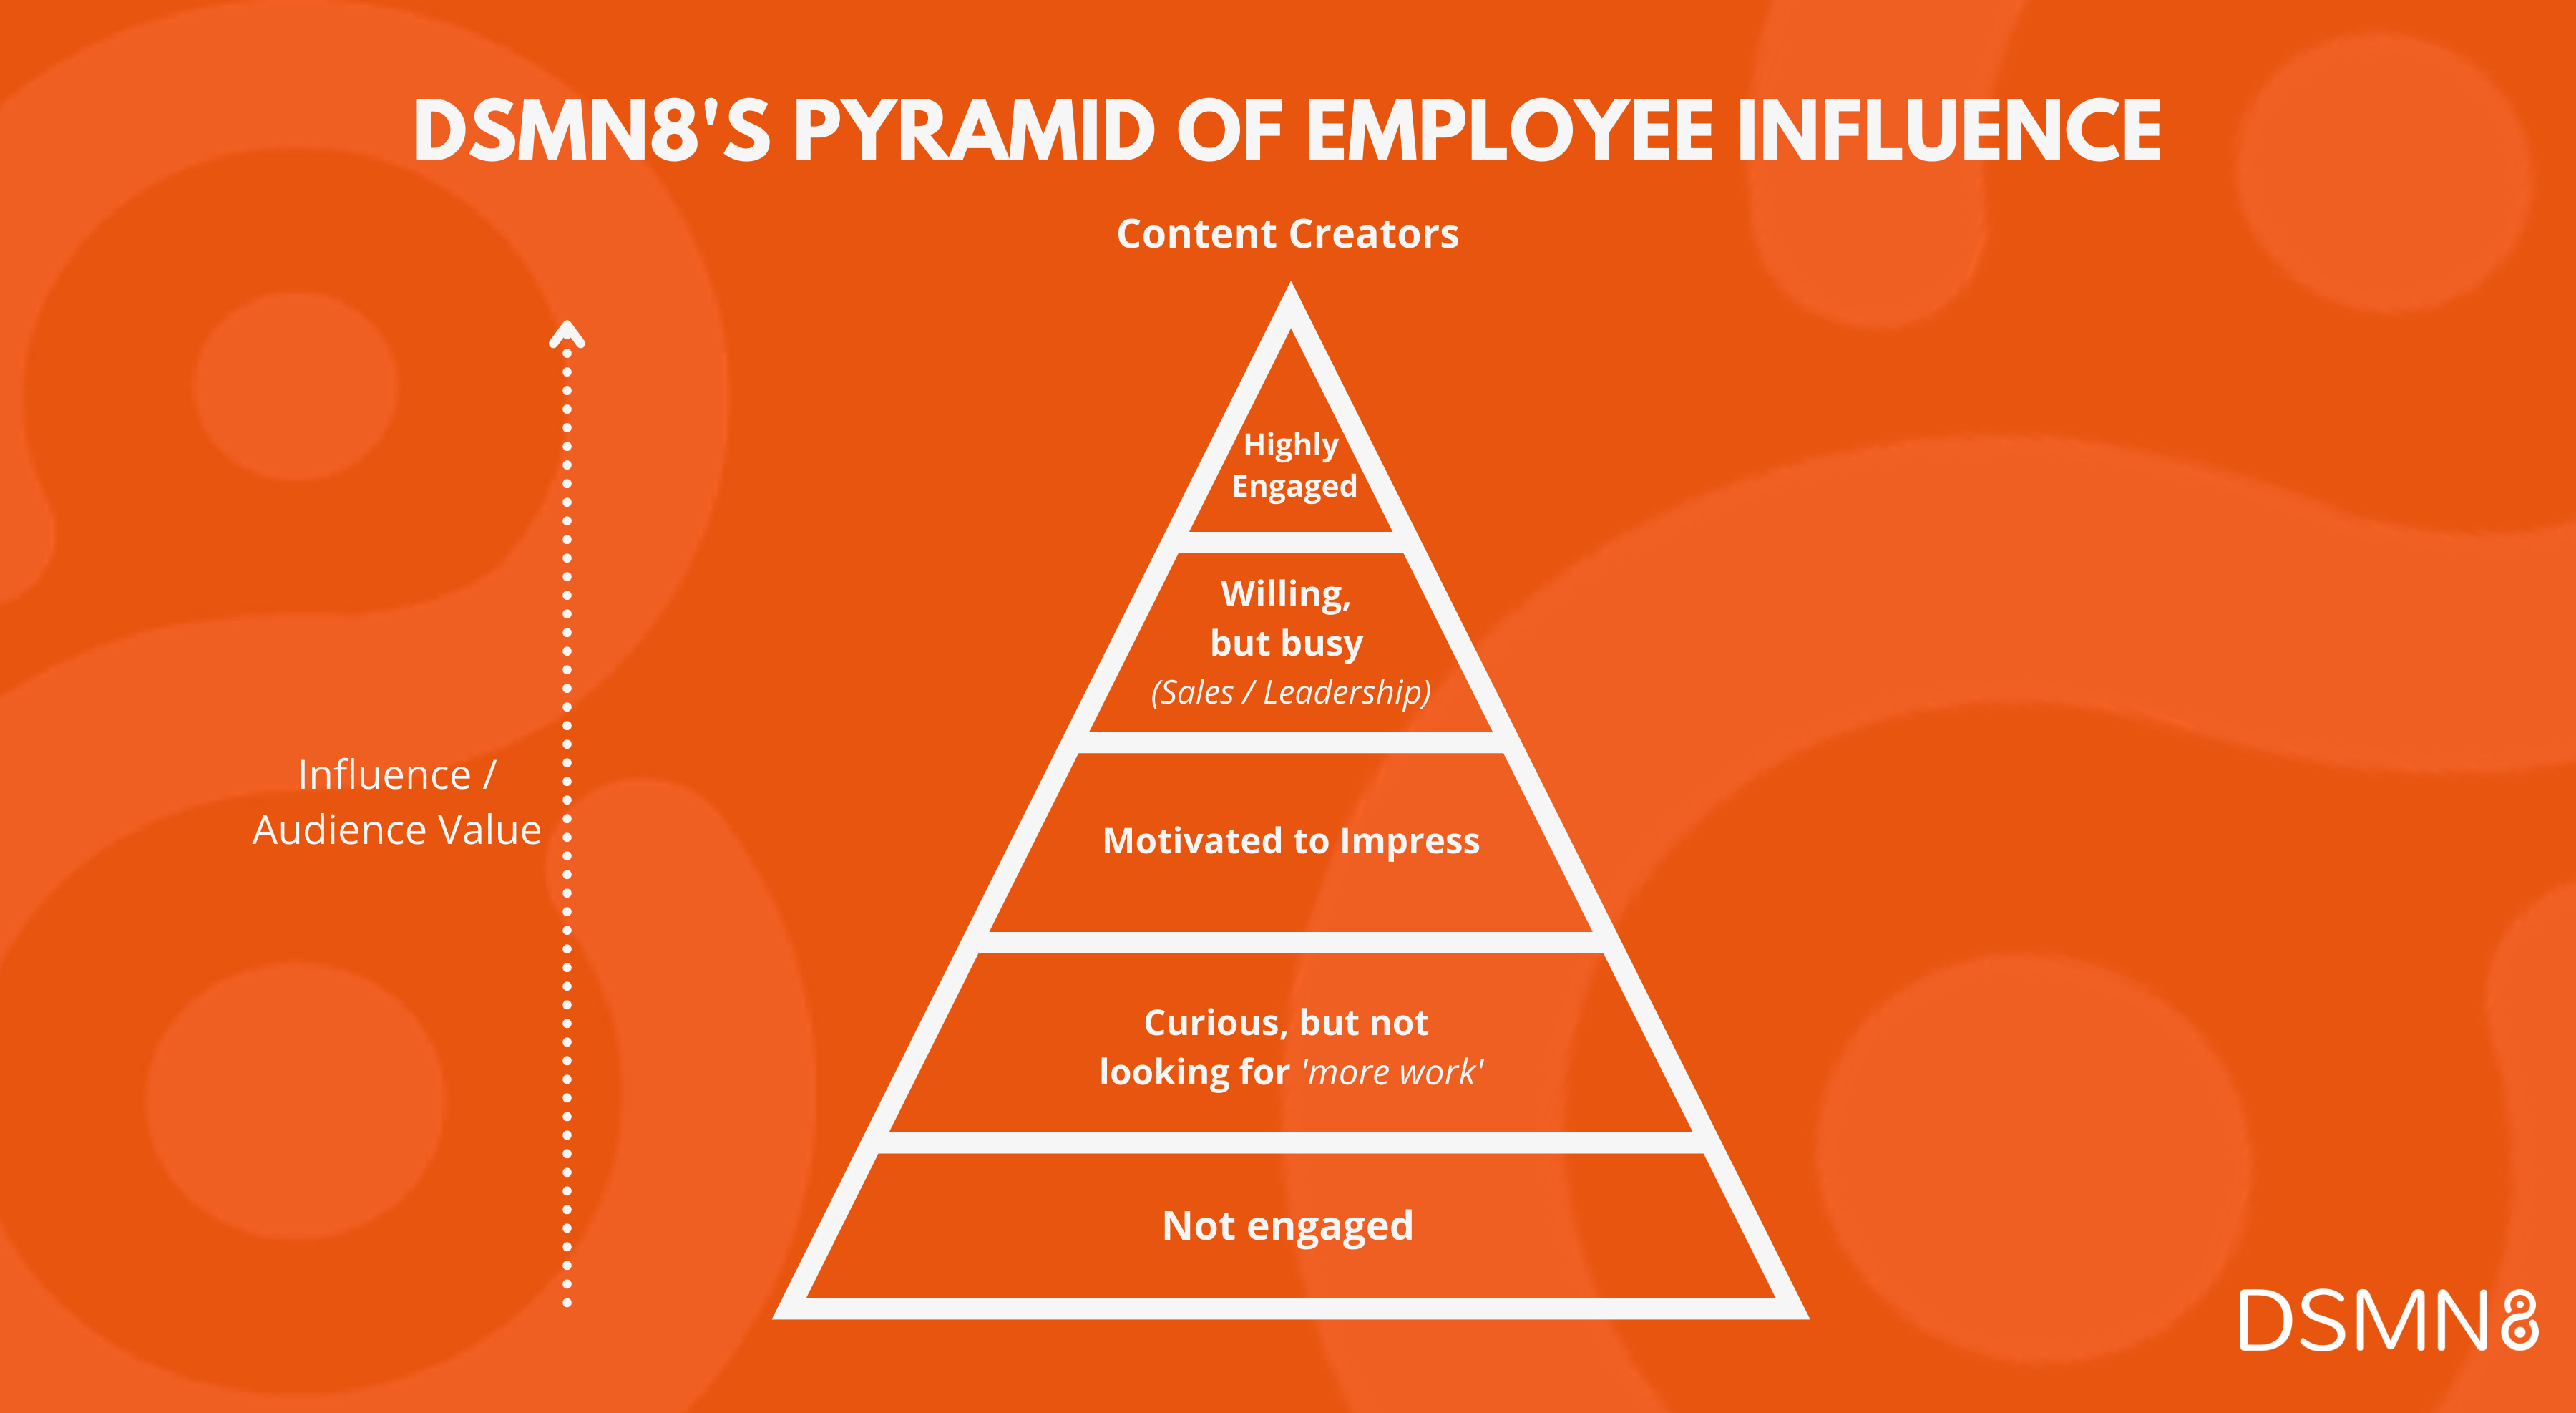 The Pyramid of Employee Influence from DSMN8 | 2022